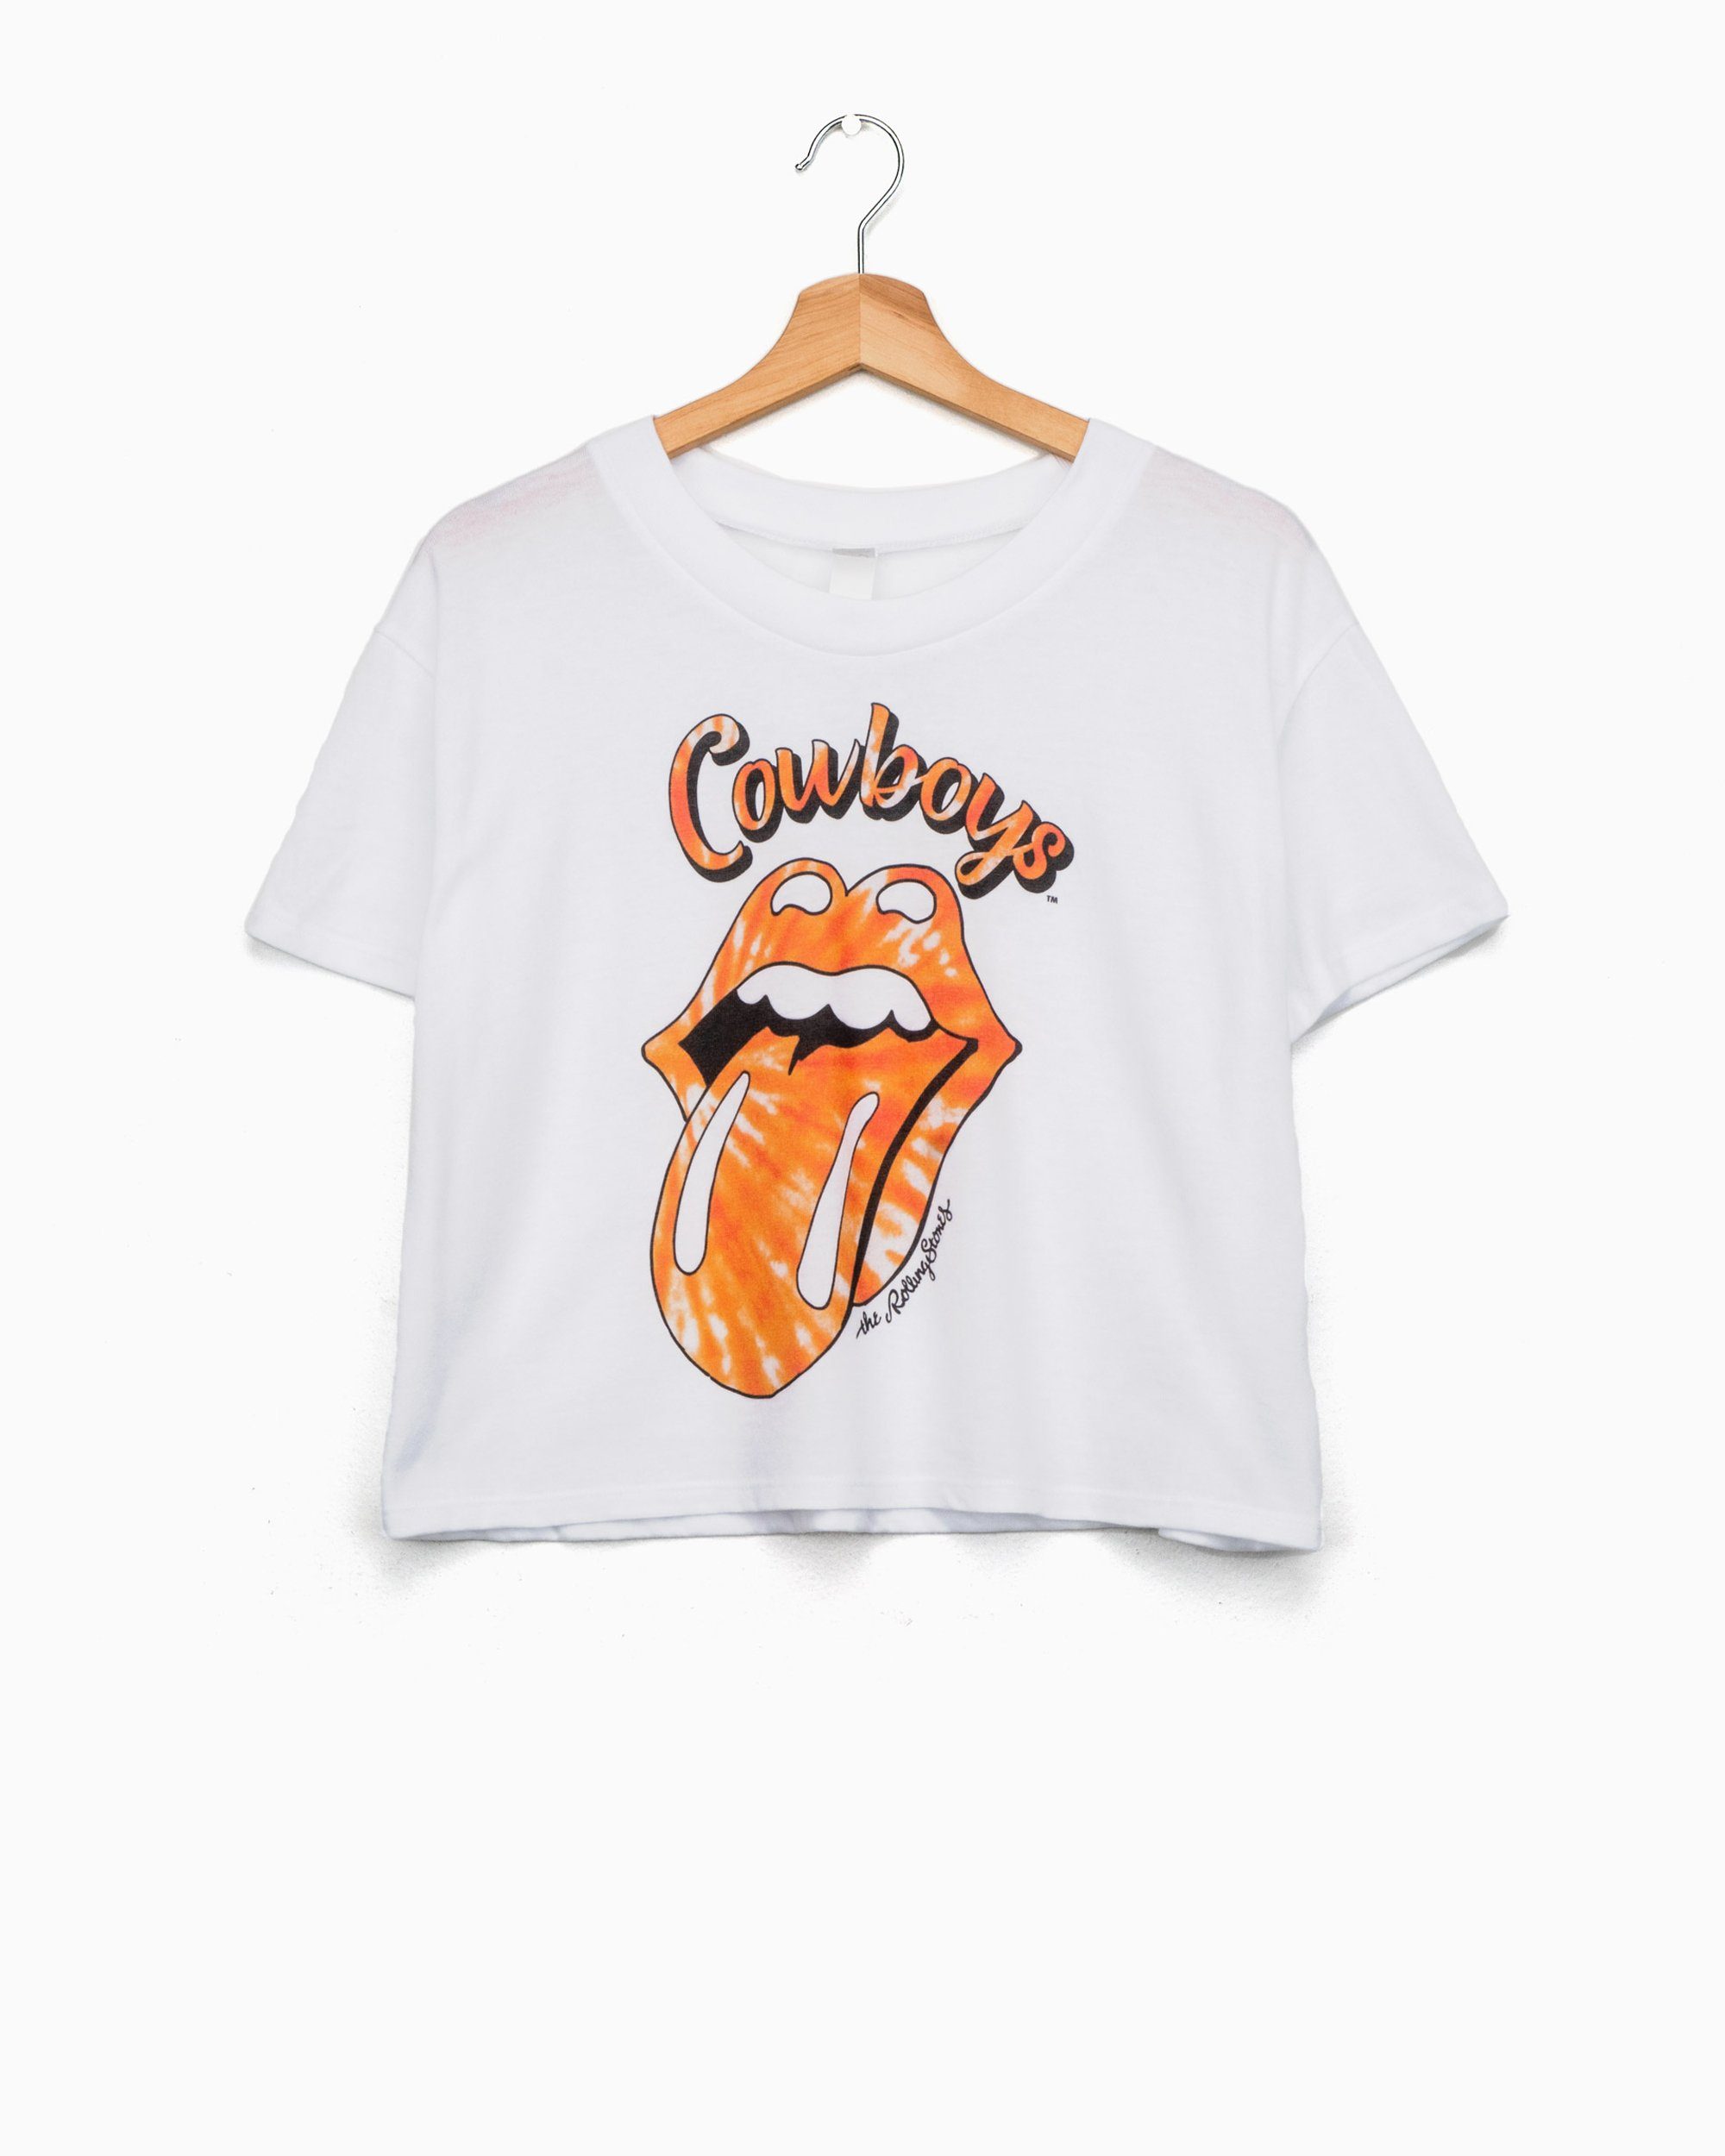 Rolling Stones Cowboys Tie Dye Lick White Cropped Tee (4522439999591)